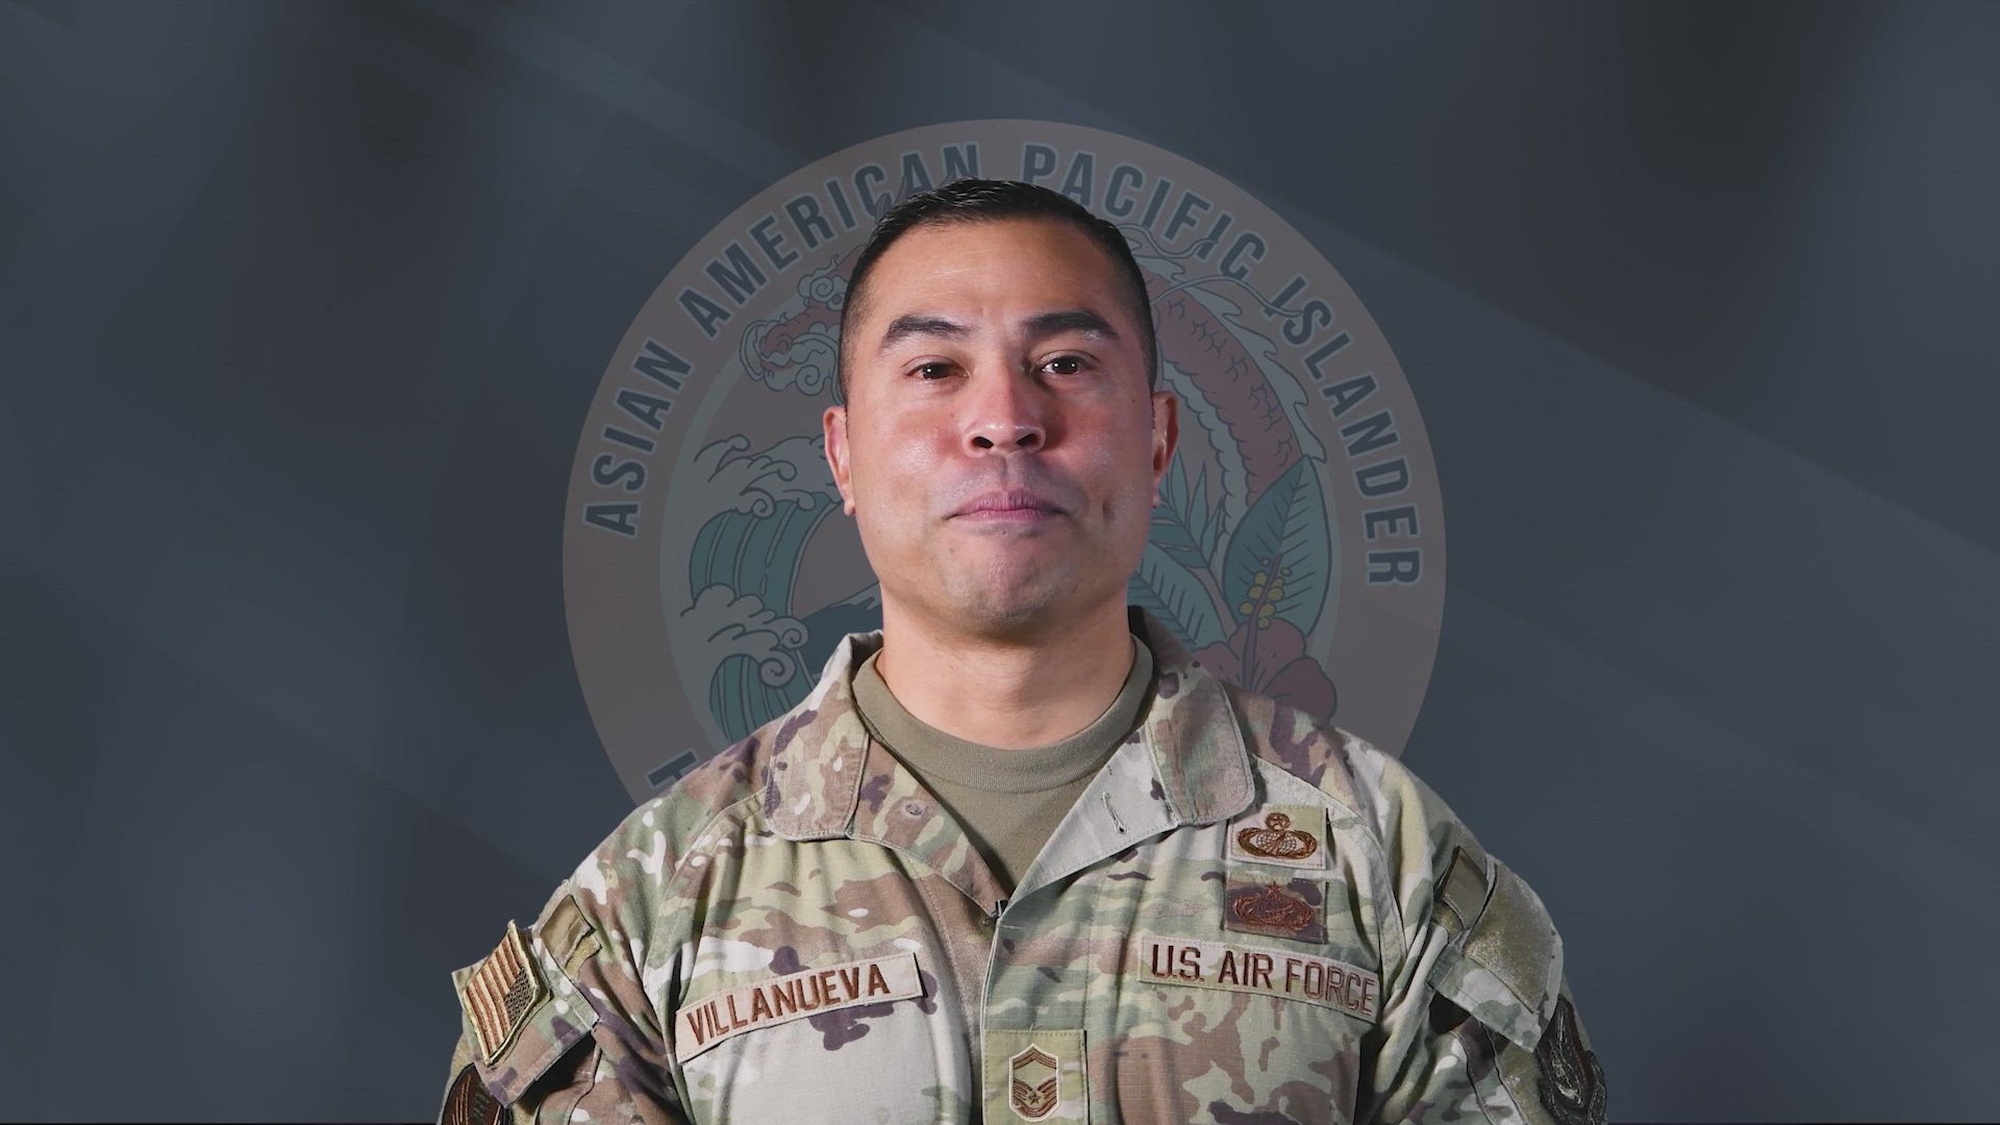 Spot video highlighting the celebration of Asian American and Pacific Islander Heritage Month and how one's culture can influence their everyday life in the military.